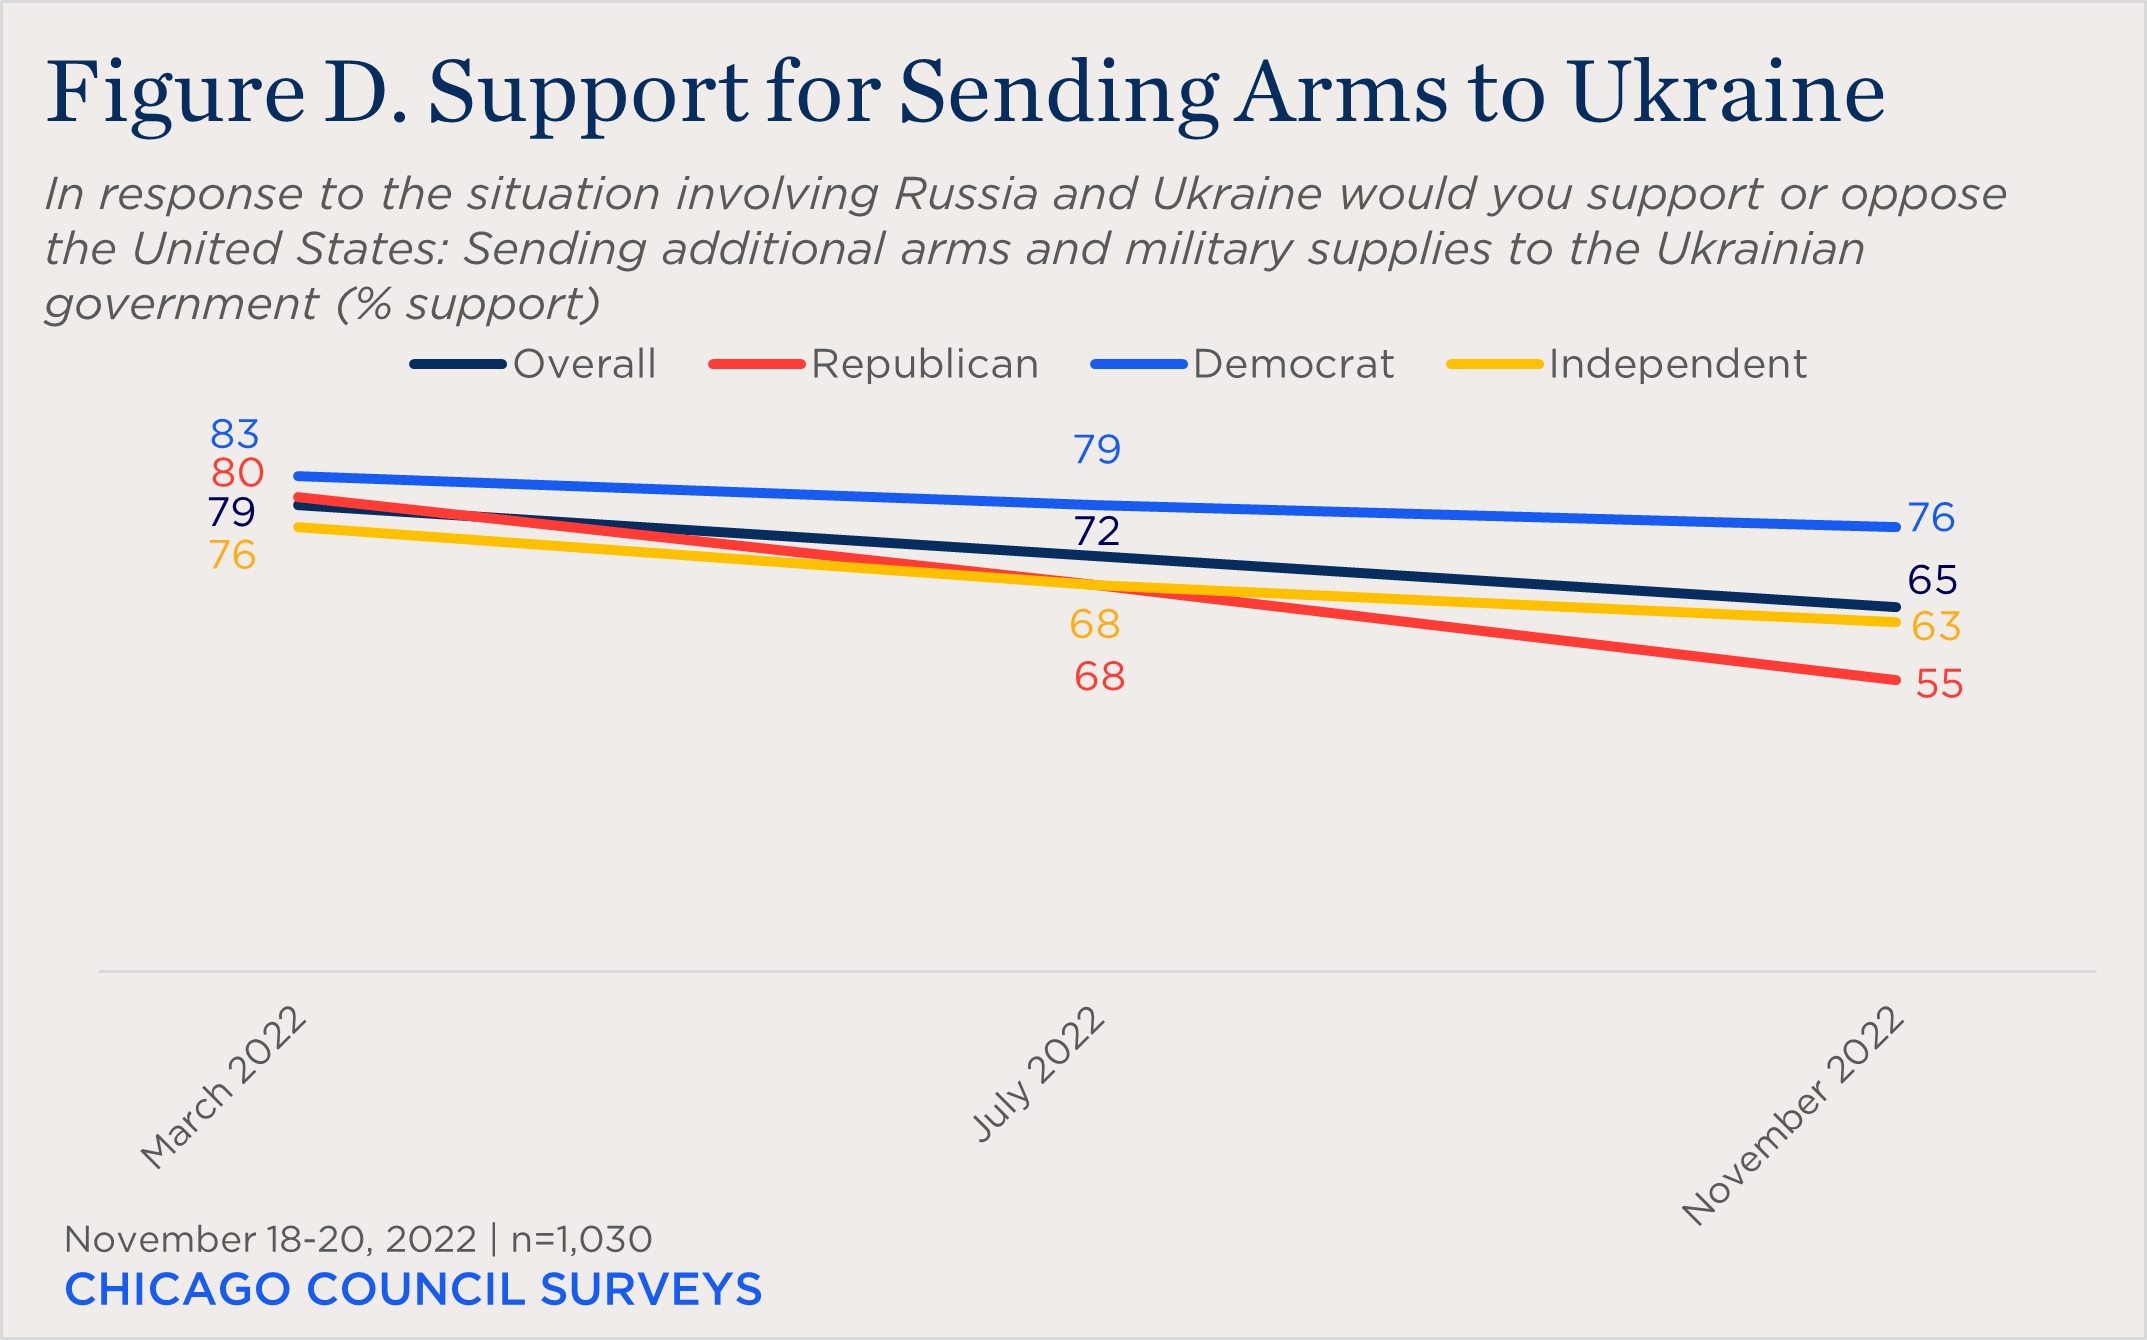 "line chart showing partisan support for sending arms to Ukraine"